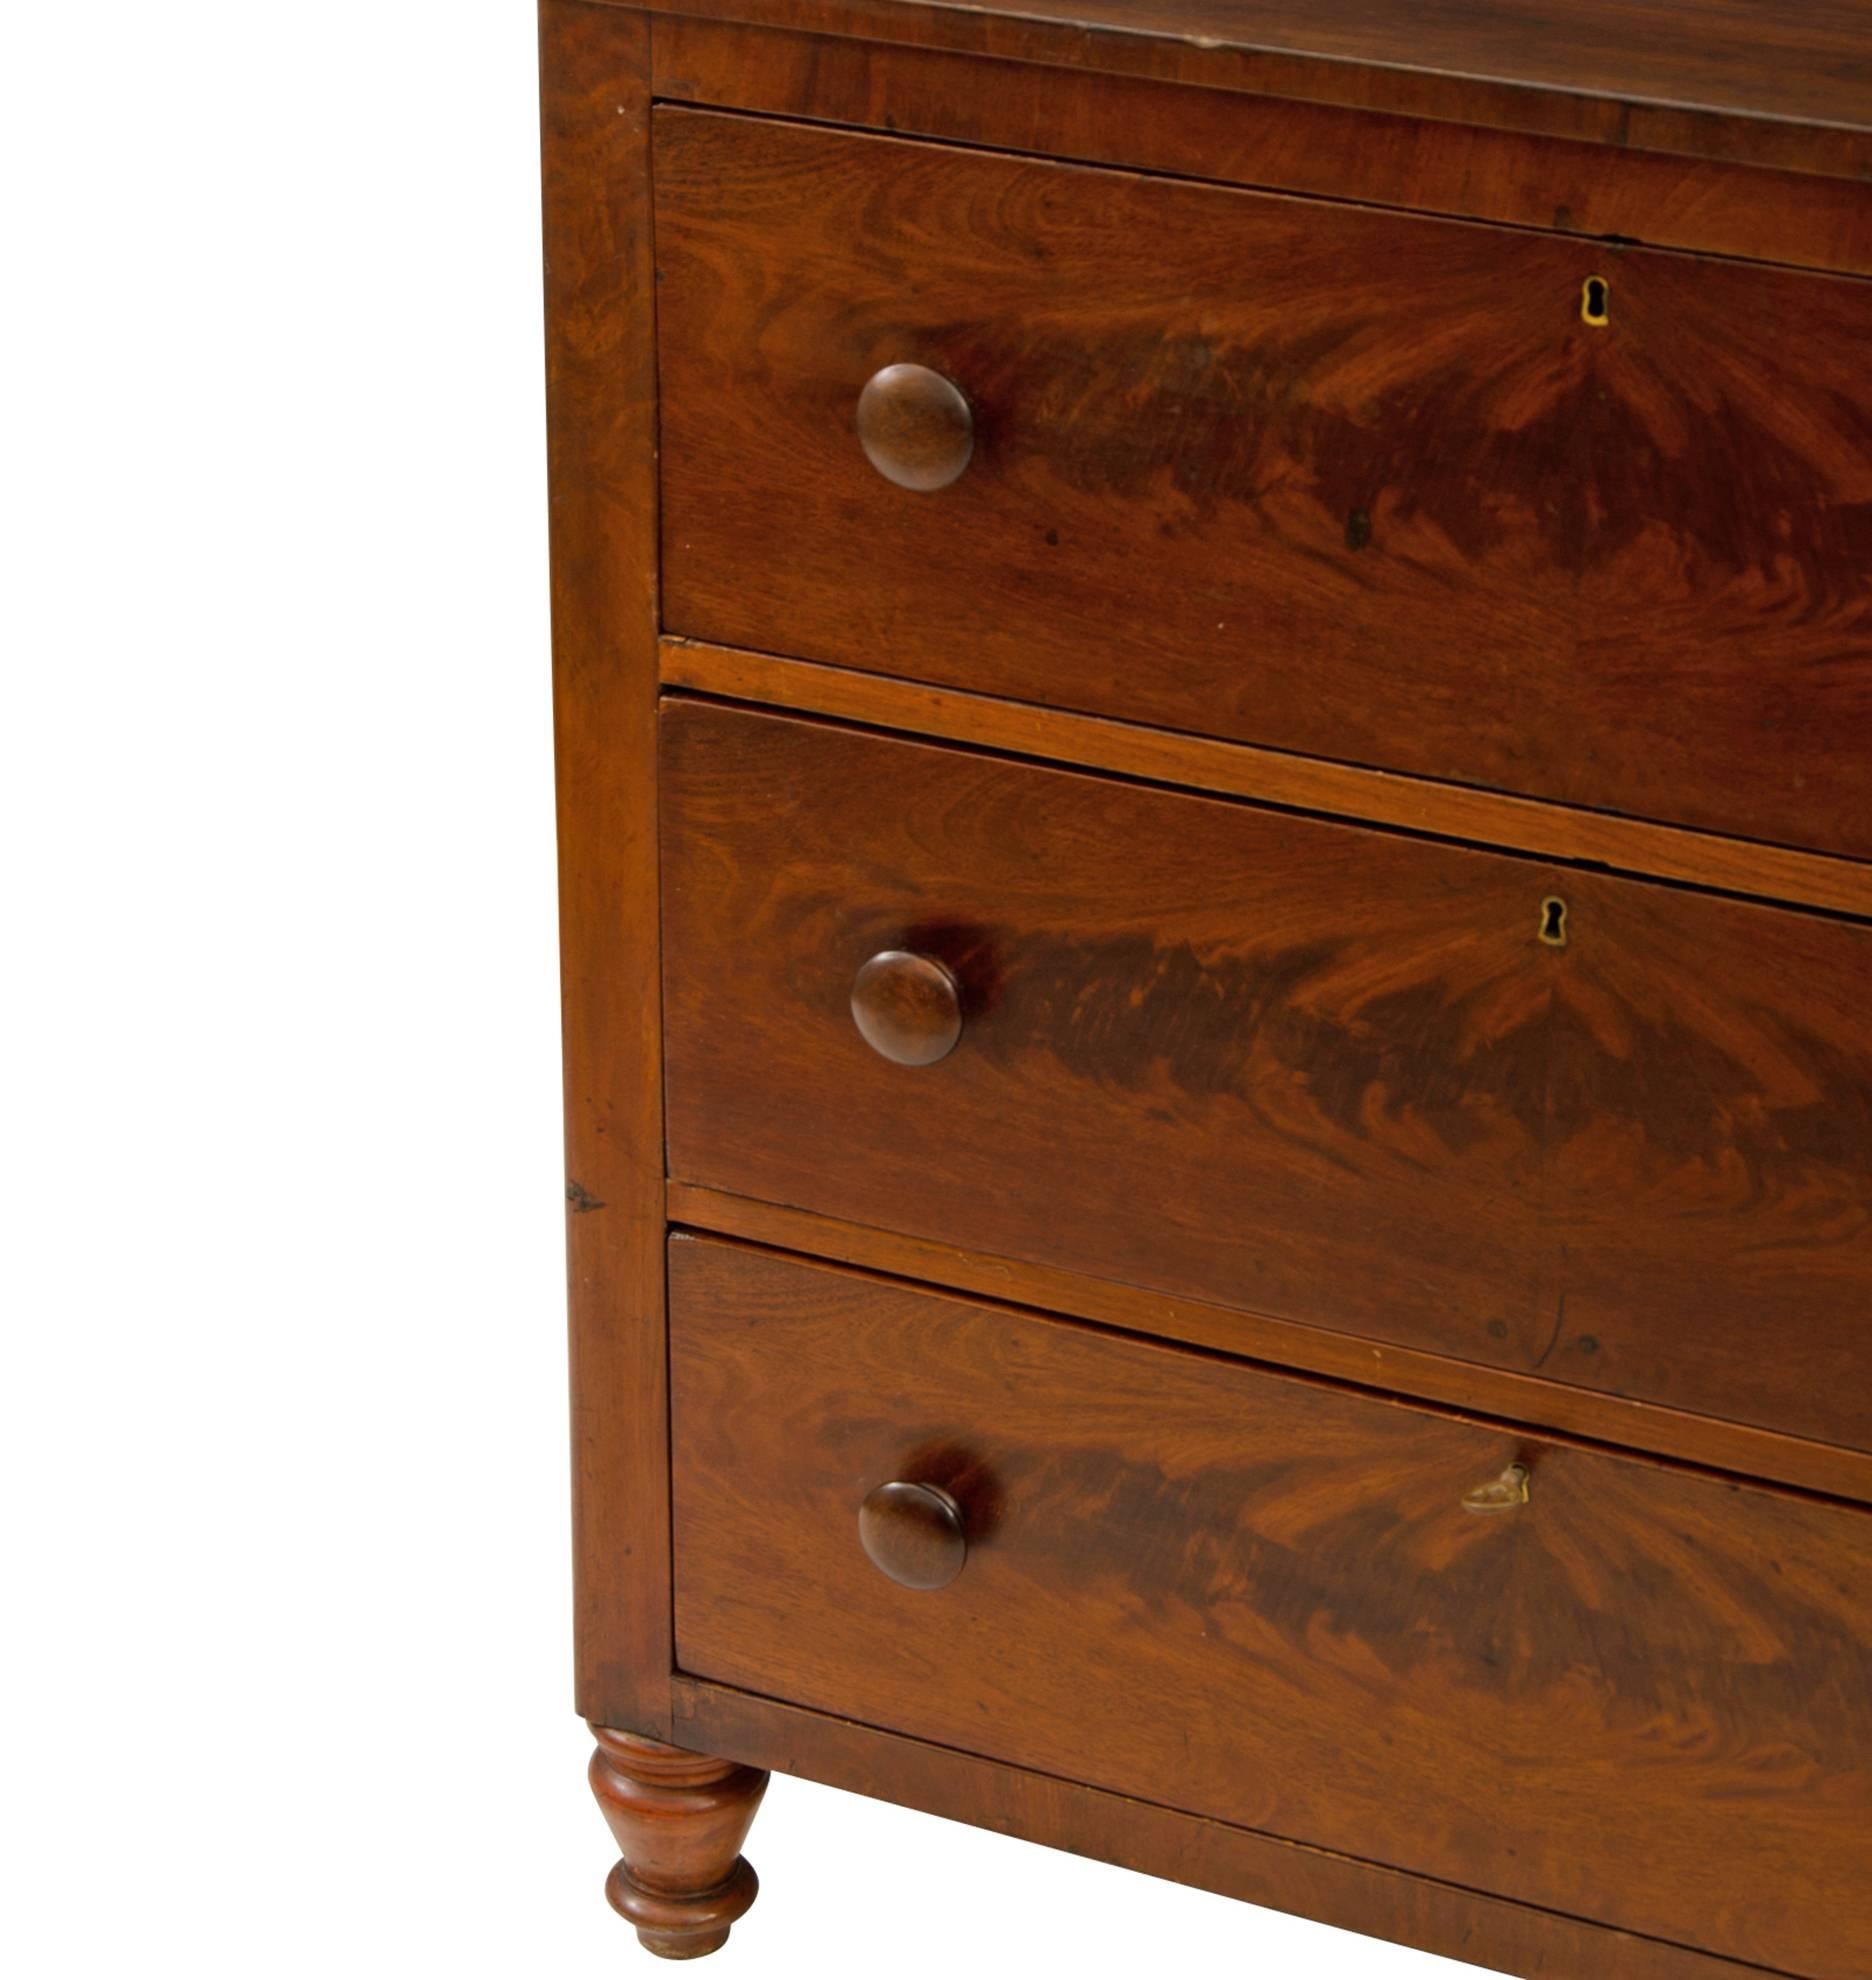 Federal Walnut Dresser with Bookmatched Drawers, circa 1850s